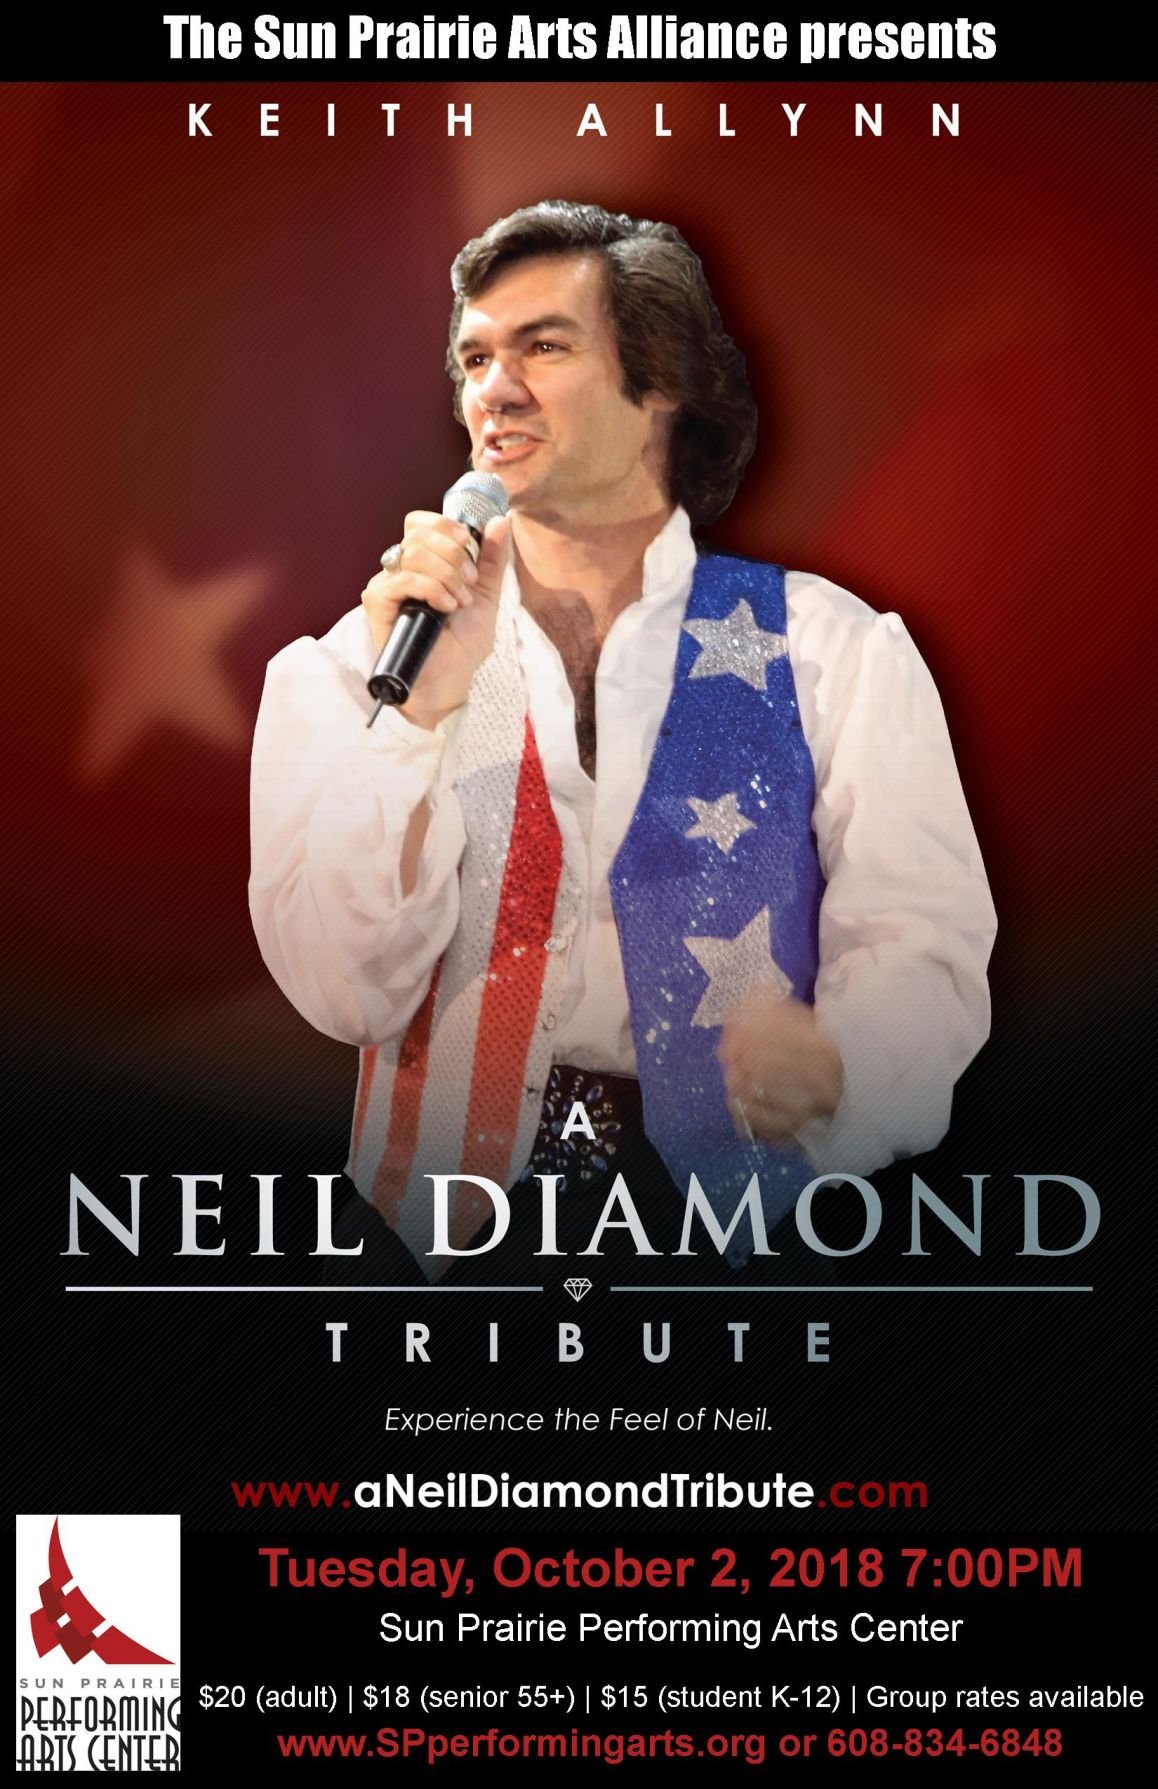 "A Neil Diamond Tribute" Performing Arts Events